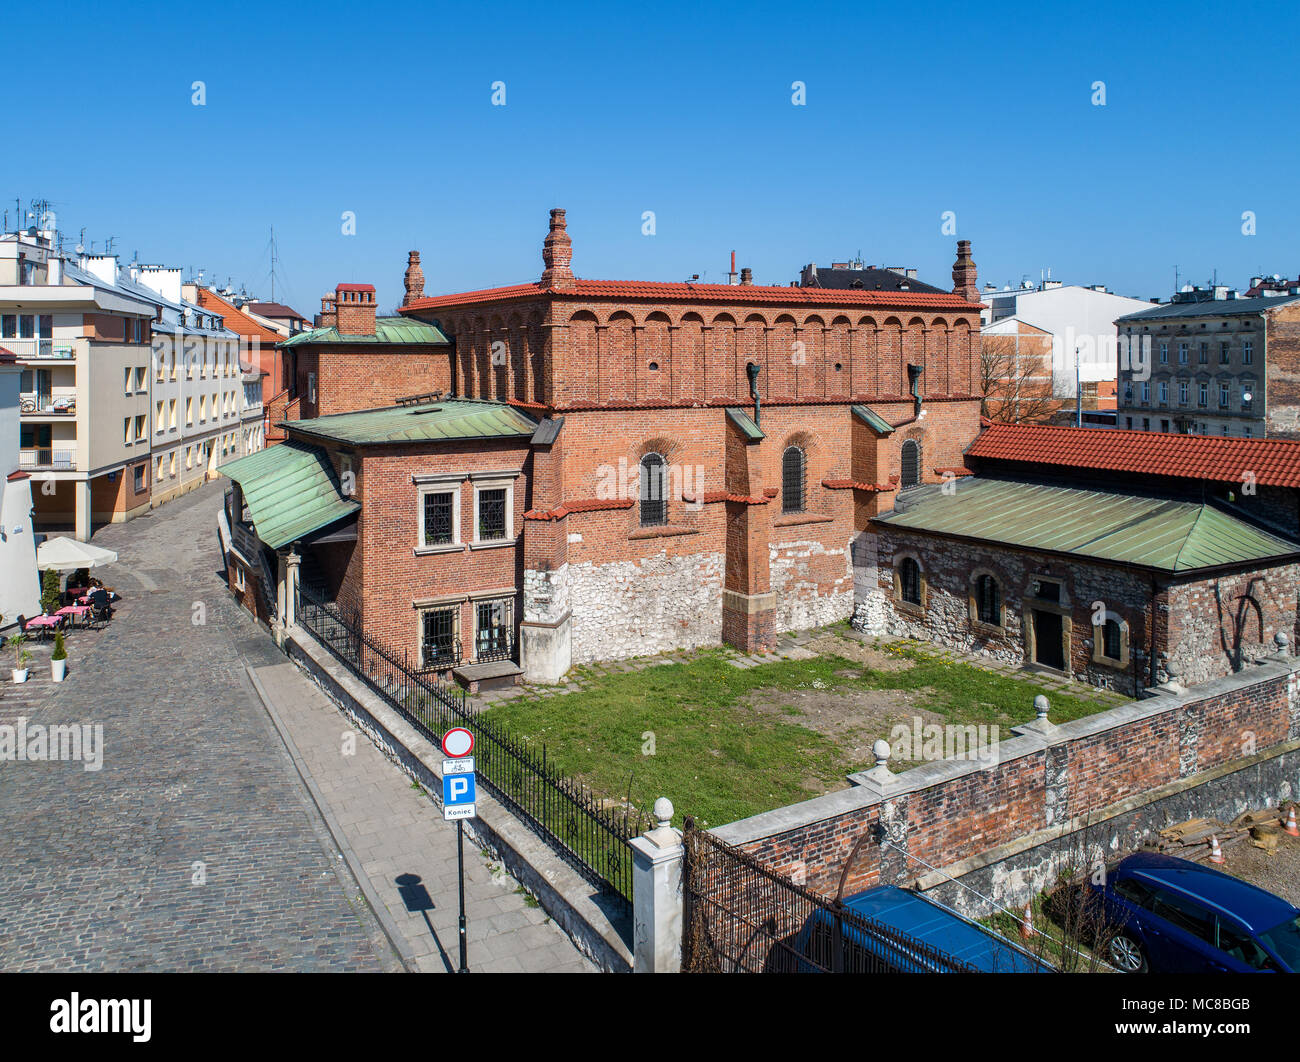 Old Synagogue in historic Jewish Kazimierz district of Cracow (Krakow), Poland. Aerial view Stock Photo